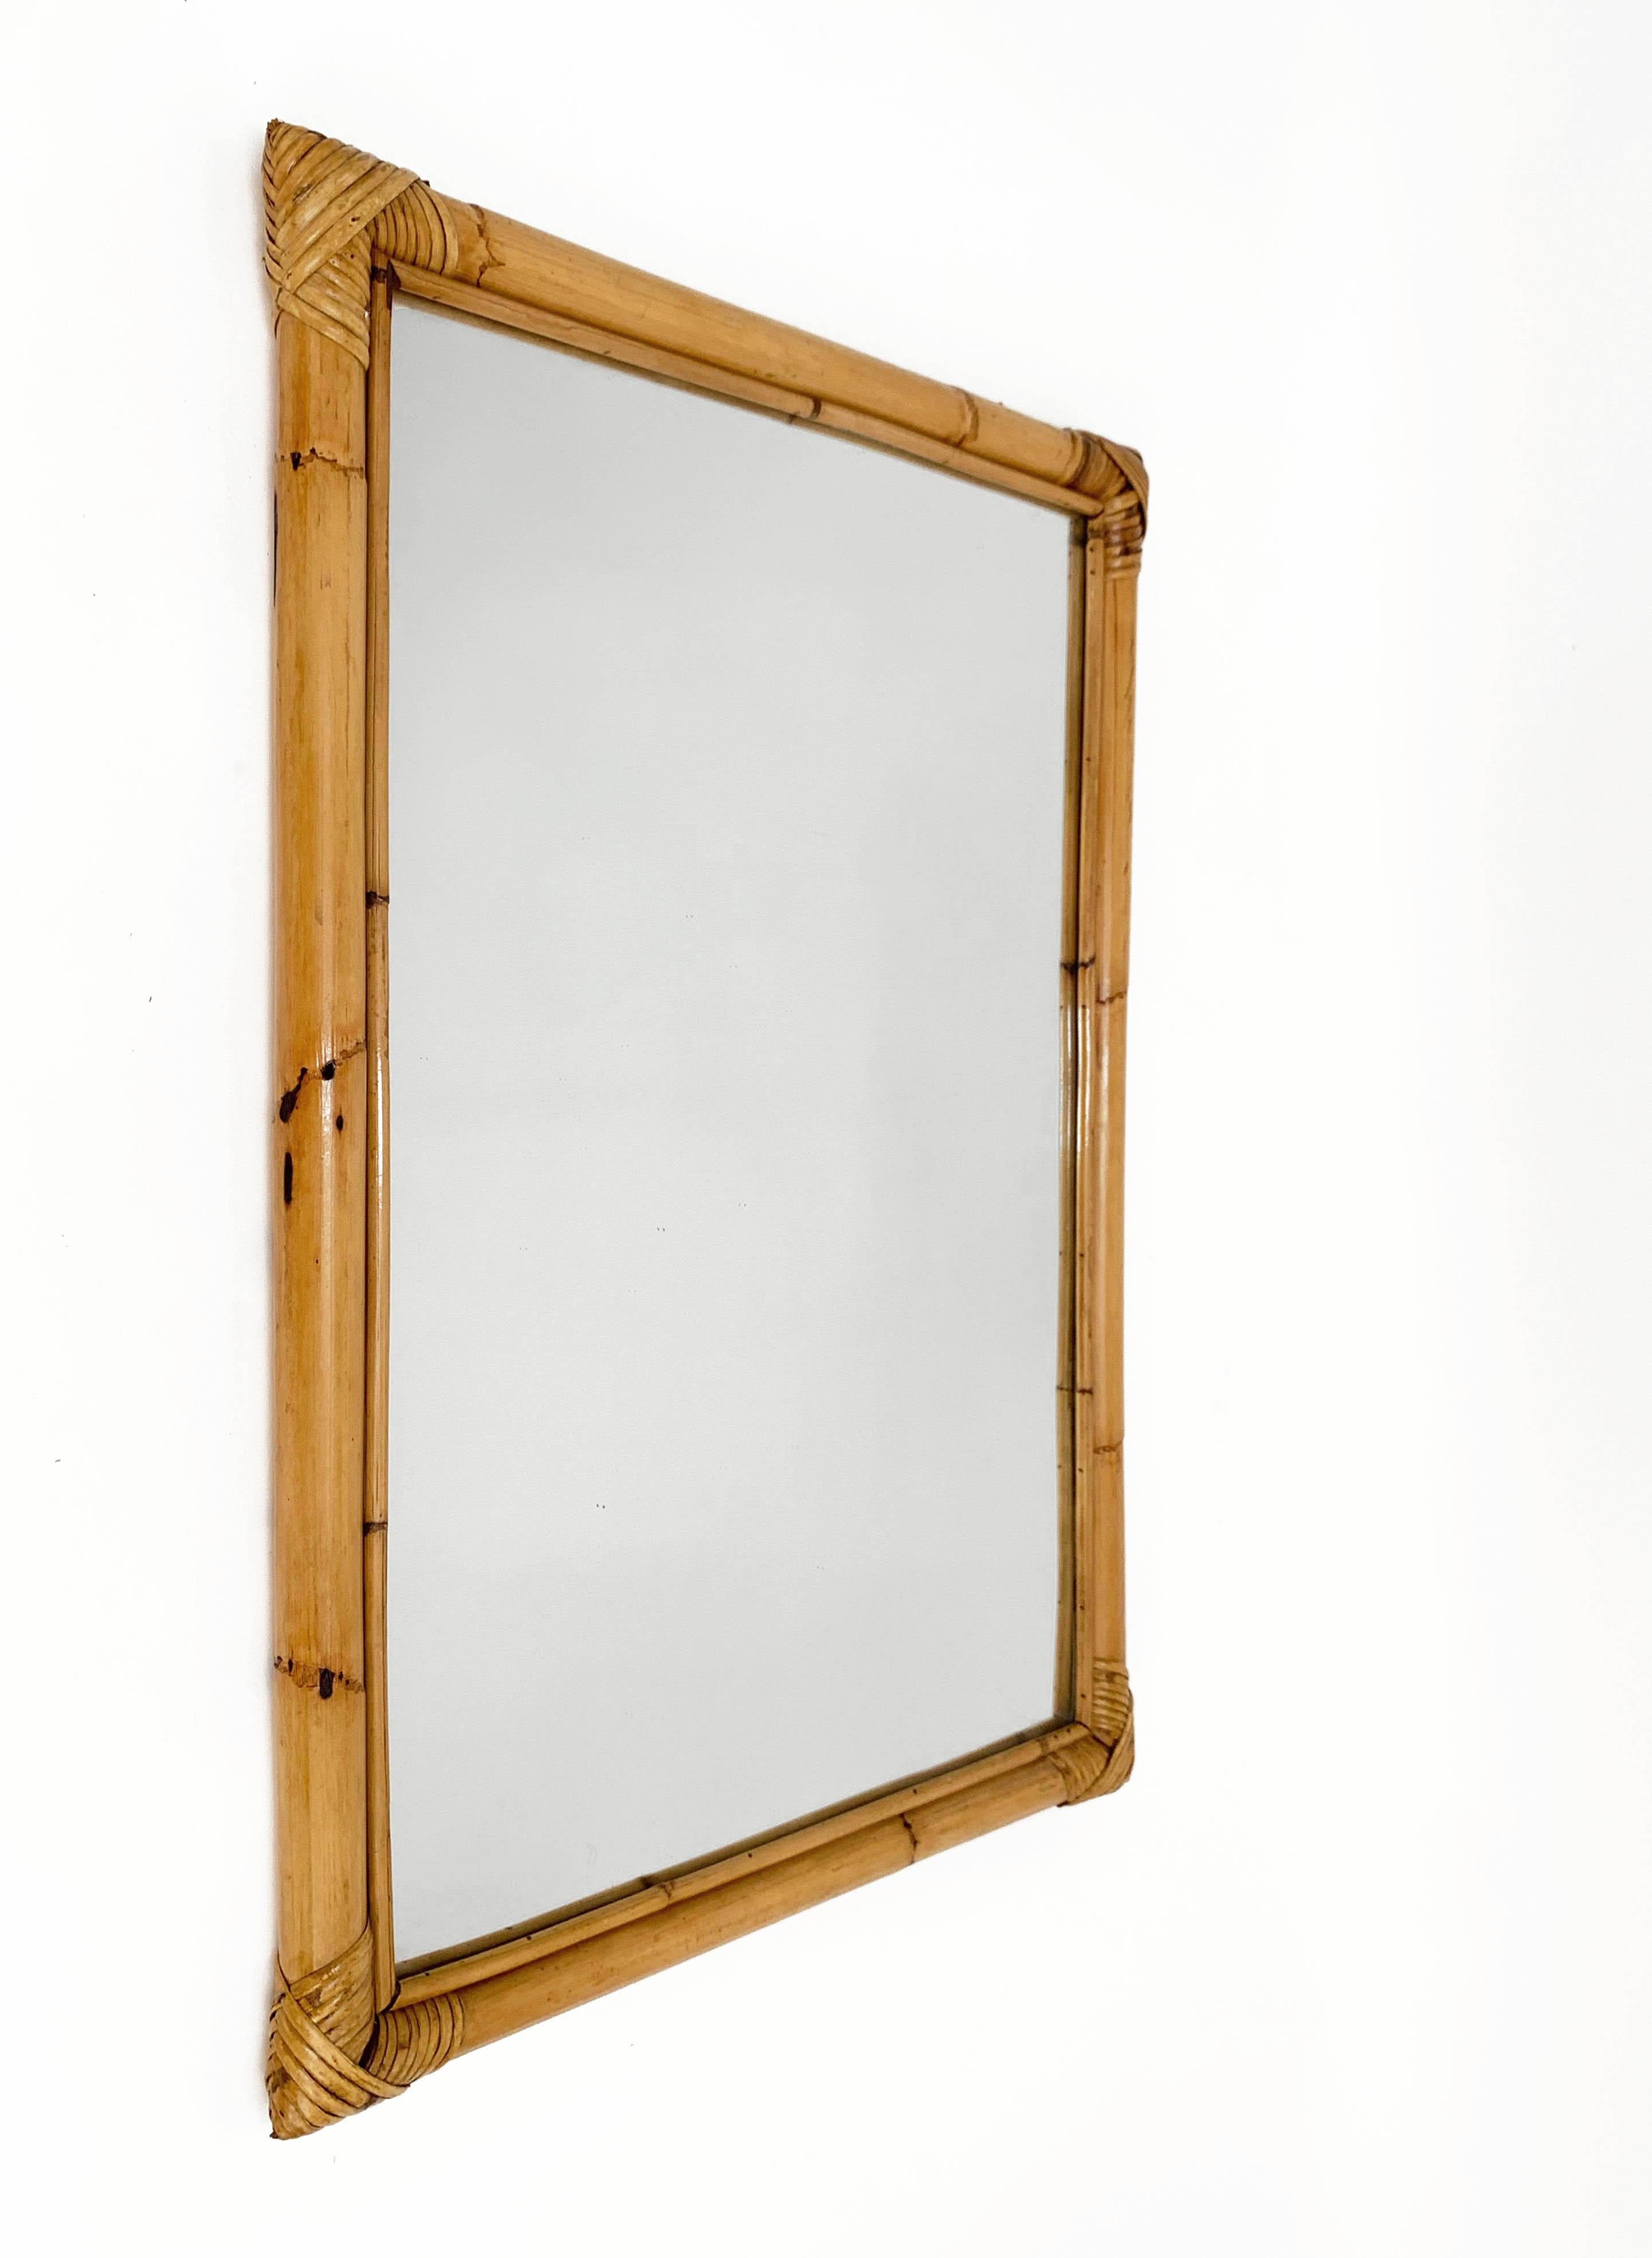 Wonderful midcentury rectangular mirror with bamboo woven wicker frame. This amazing item was produced in Italy during the 1970s.

The way in which bamboo lines and glass integrate is superb and transmits to this mirror a neverending